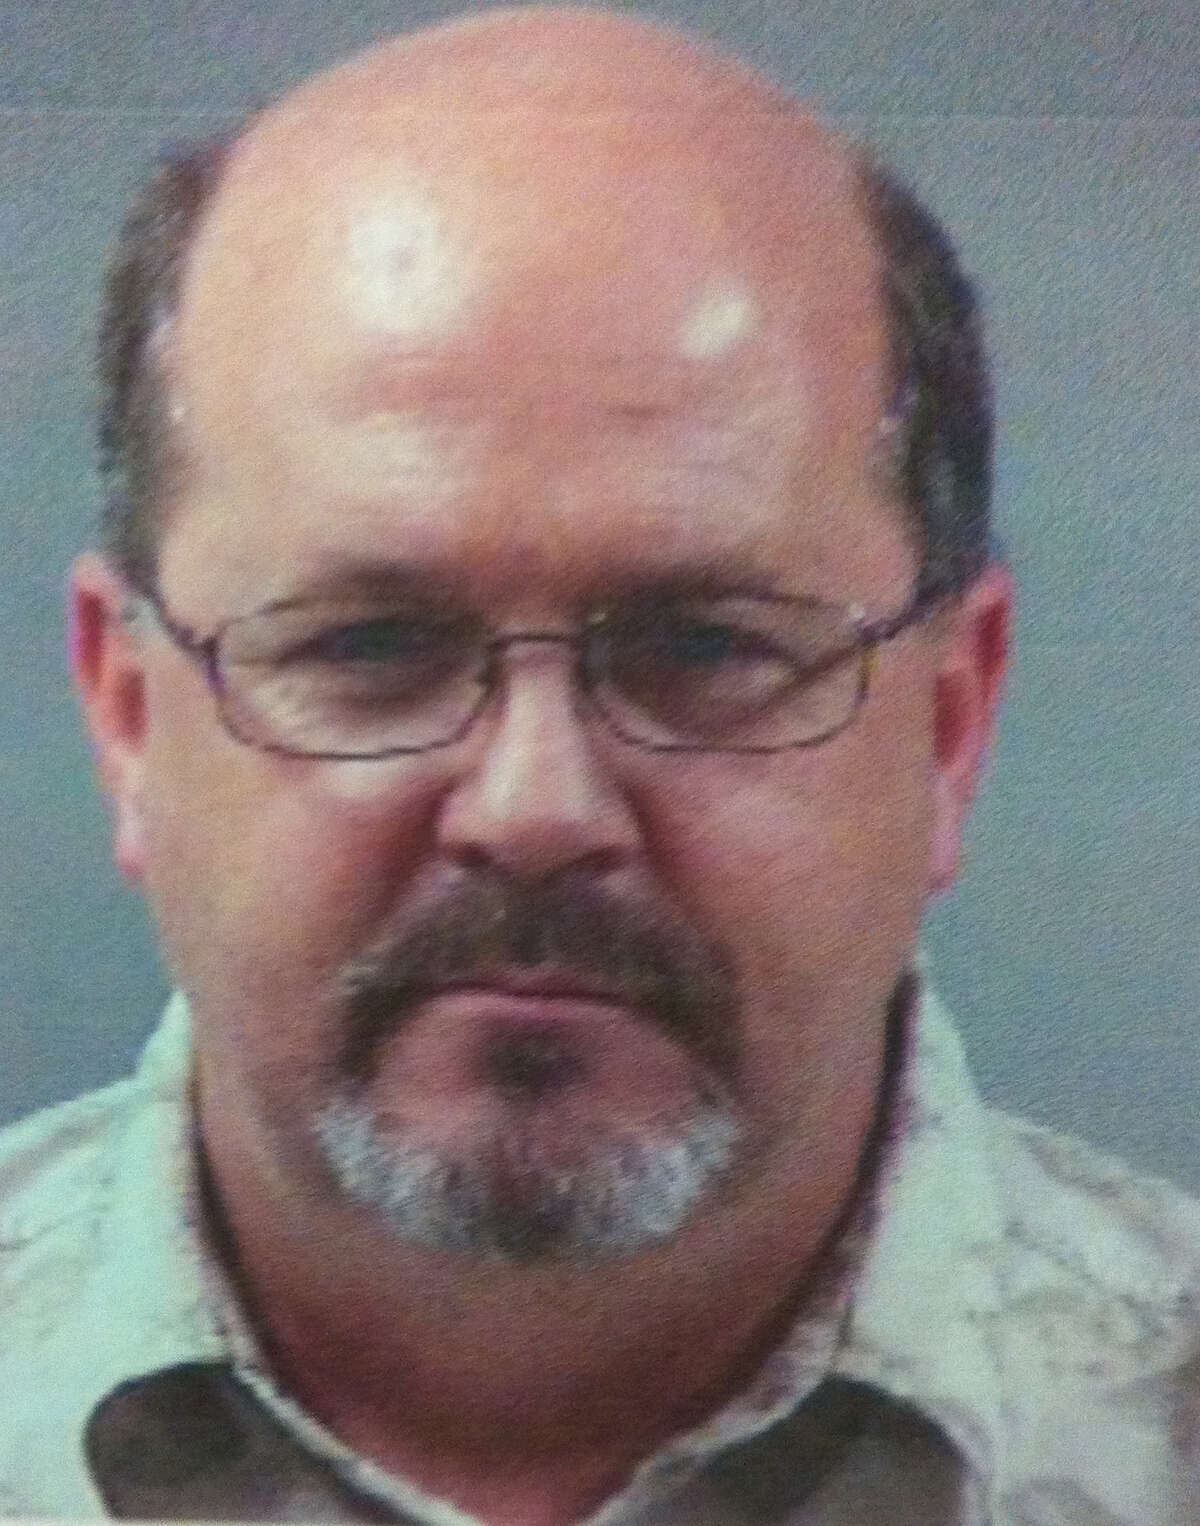 Douglas Grant was arrested Jan. 11 for soliciting prostitution during a multi-agency sting.